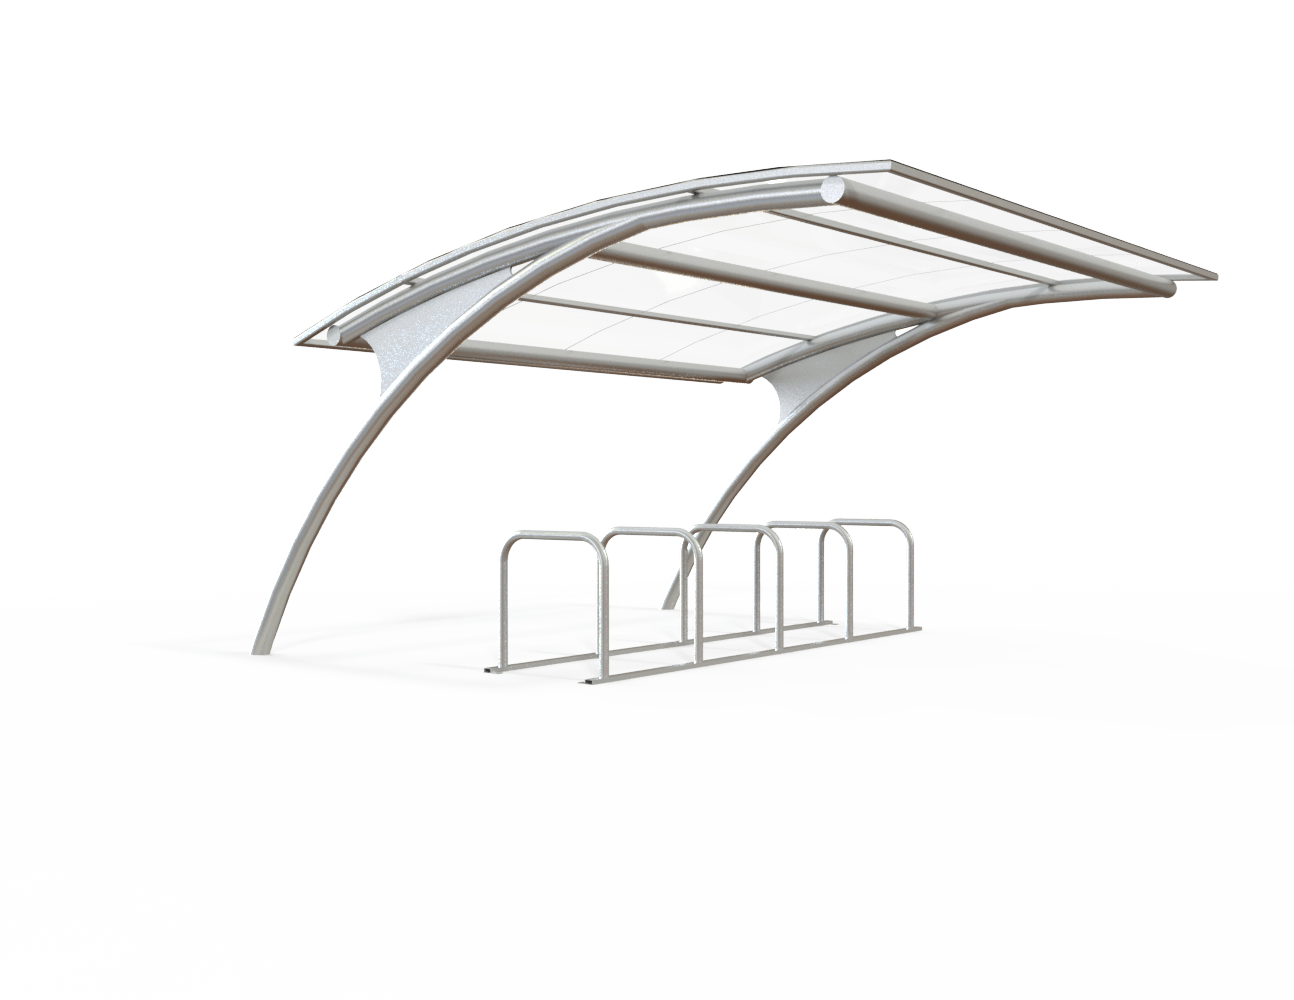 Thirlmere Cantilever Cycle Shelter